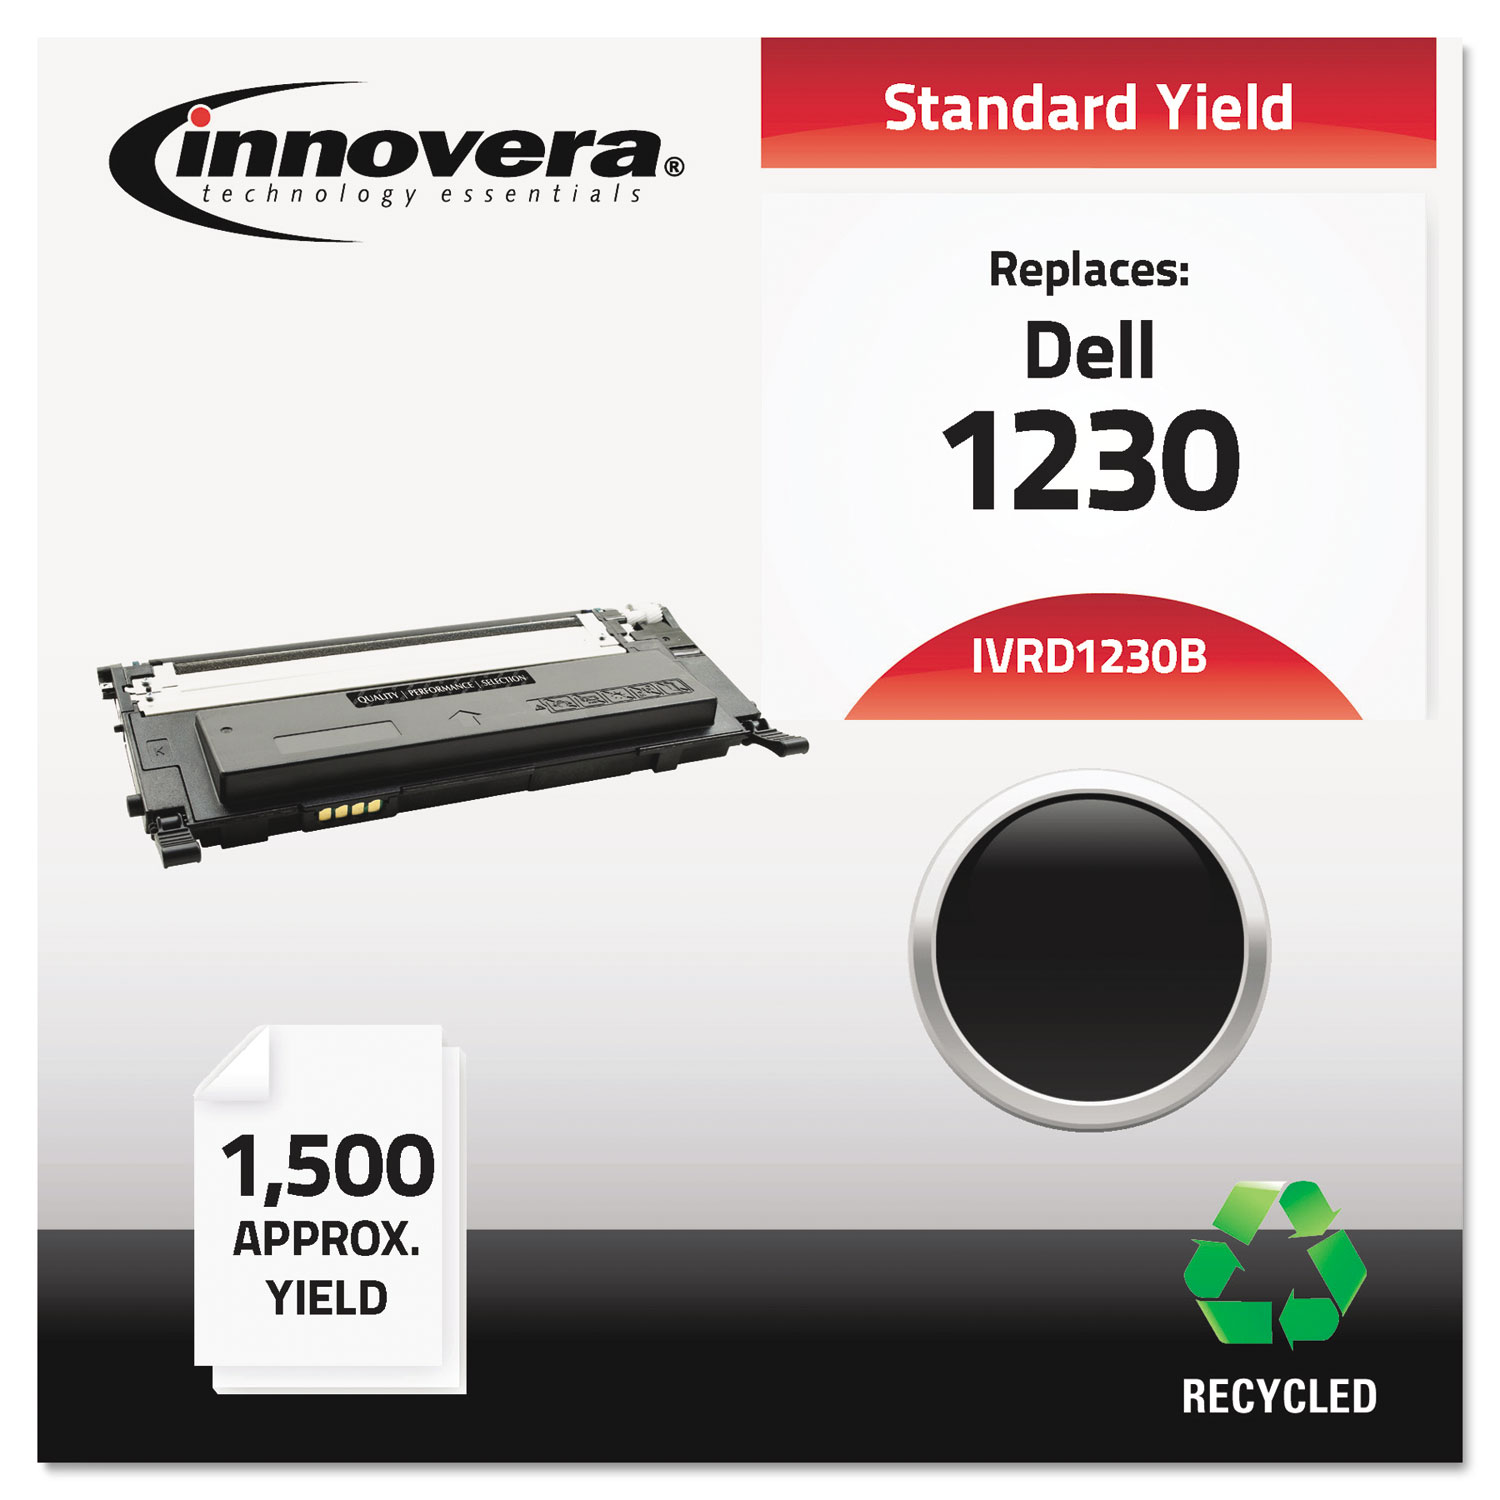 Remanufactured 330-3012 (1230) Toner, 1500 Page-Yield, Black